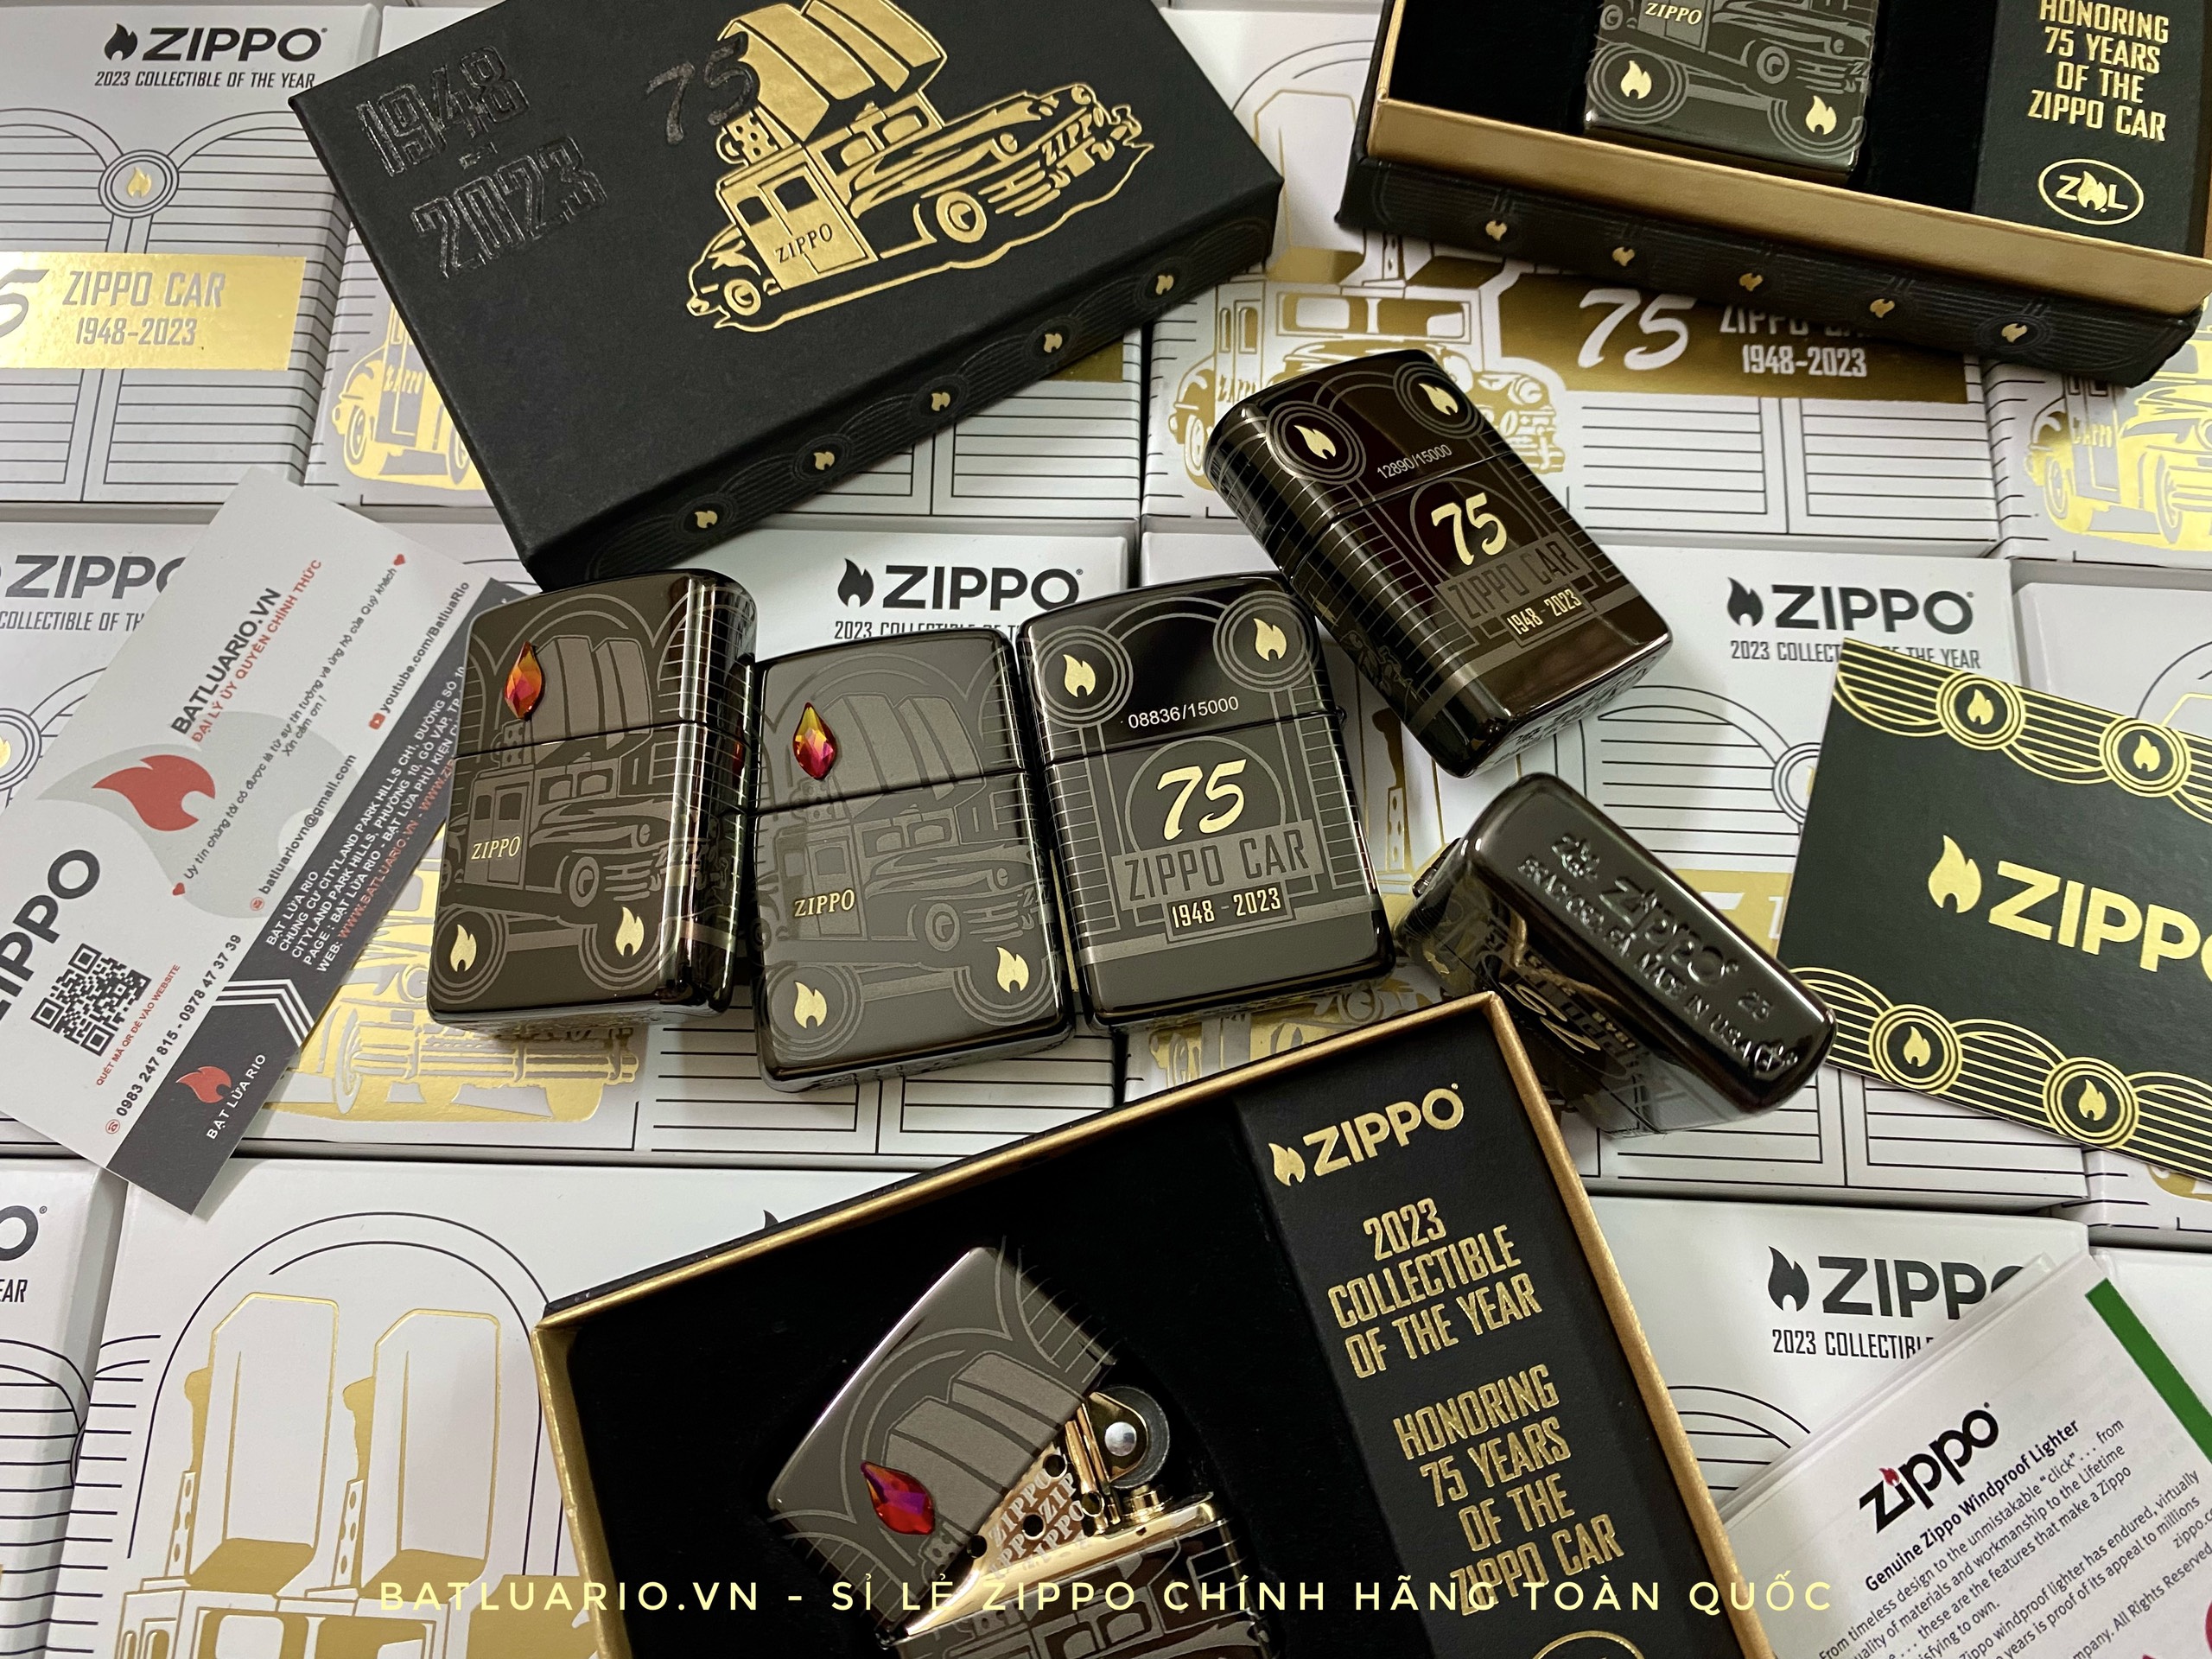 Zippo 48692 - Zippo 2023 Collectible Of The Year - Zippo Car 75th Anniversary Asia Pacific Limited Edition - Zippo COTY 2023 - Honoring 75 Years Of The Zippo Car 26